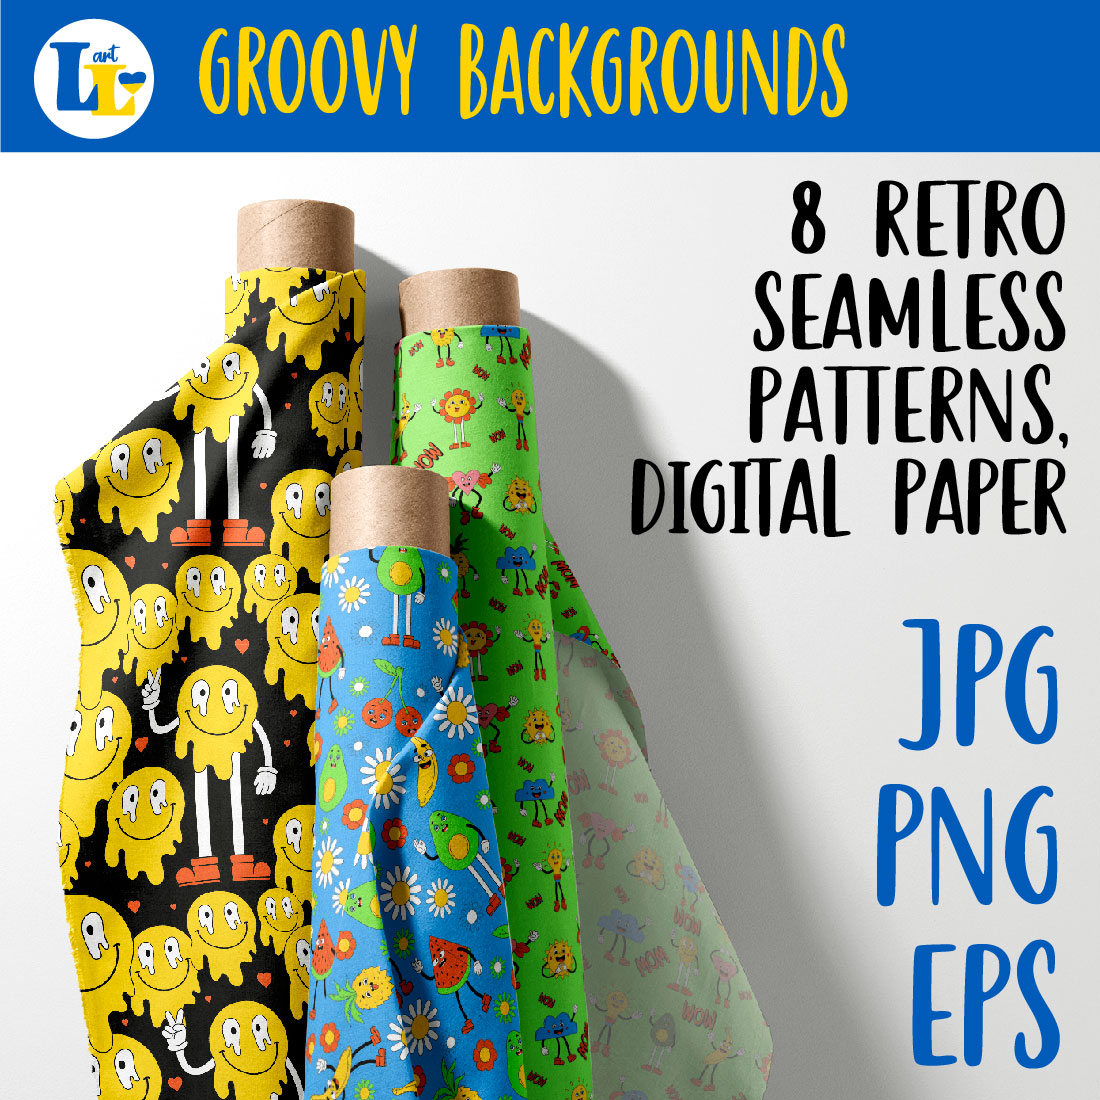 Retro Seamless Patterns, Groovy Backgrounds previews.